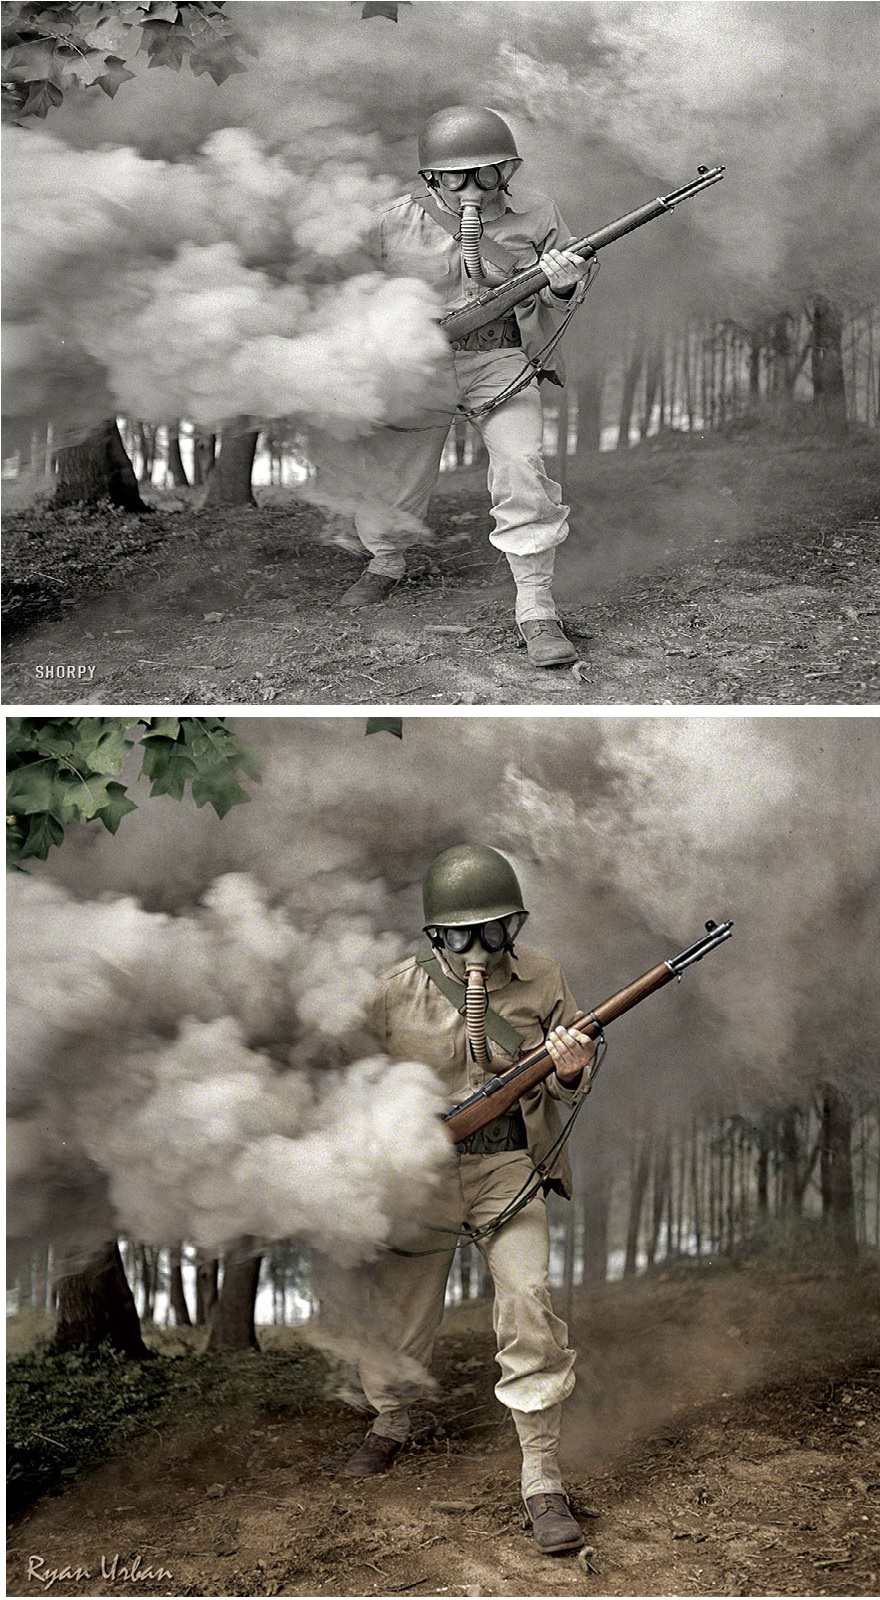 Sergeant George Camblair practicing with a gas mask in a smokescreen – Fort Belvoir, Virginia, 1942